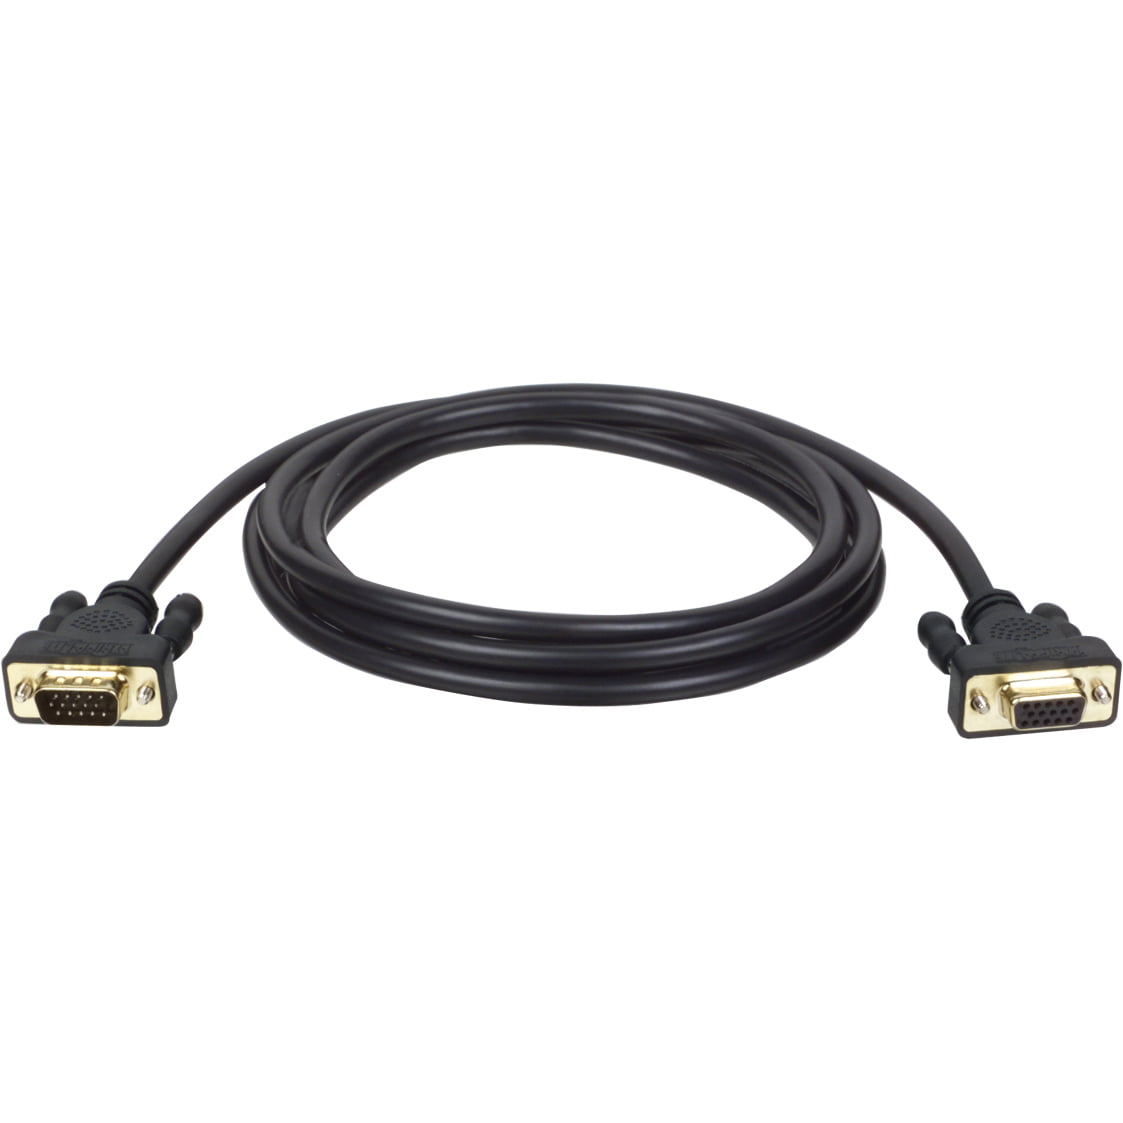 NEW Gold HD15M VGA Monitor Extension Cable 10 Ft HD15F SVGA 